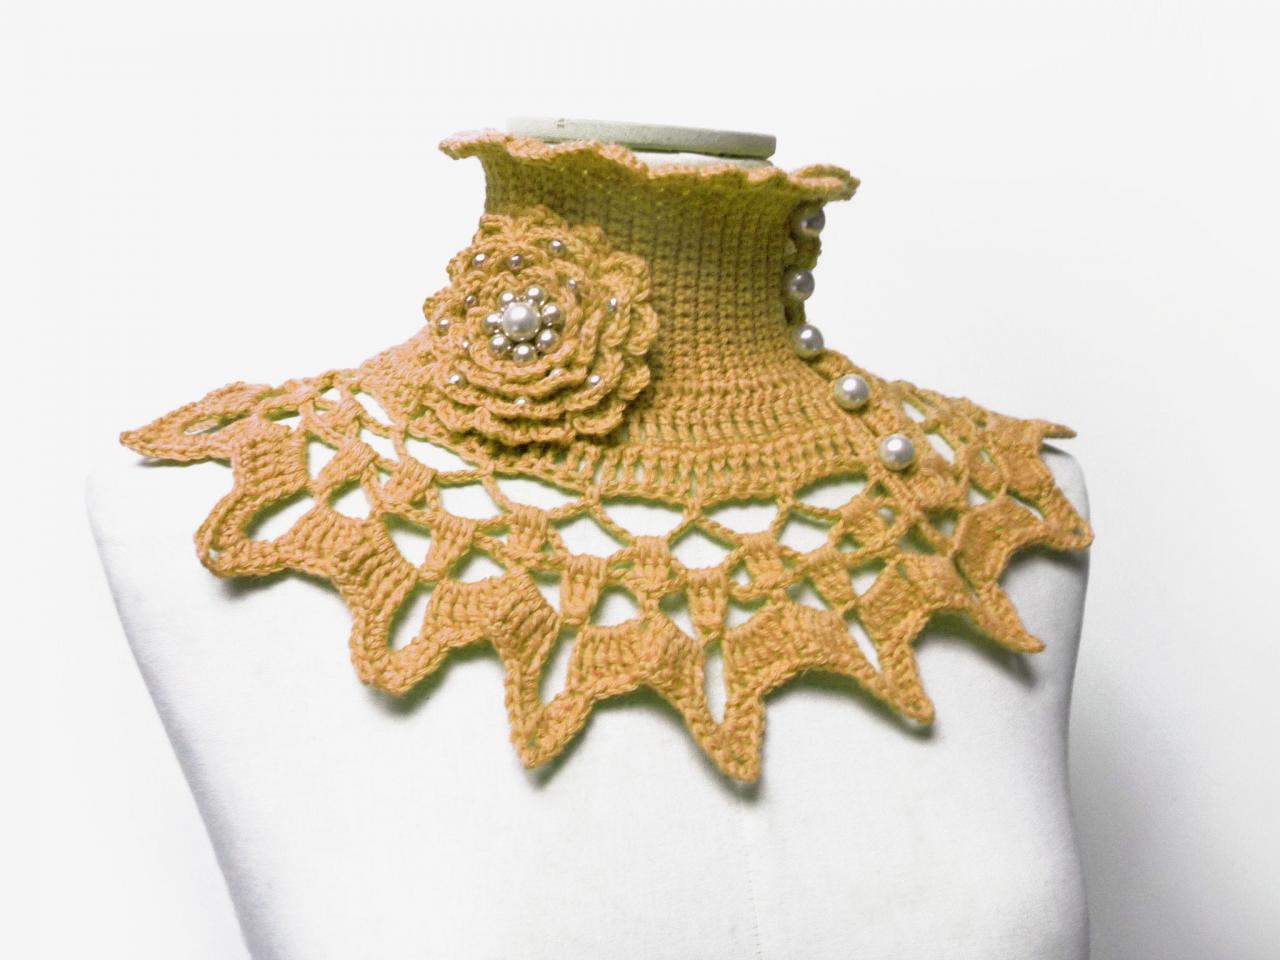 Custom Color Collar With Turtleneck, Crochet Ruffled And Lace Neck Piece, Mustard Yellow Wool Neckwarmer, Victorian Style, Mother Gift Idea